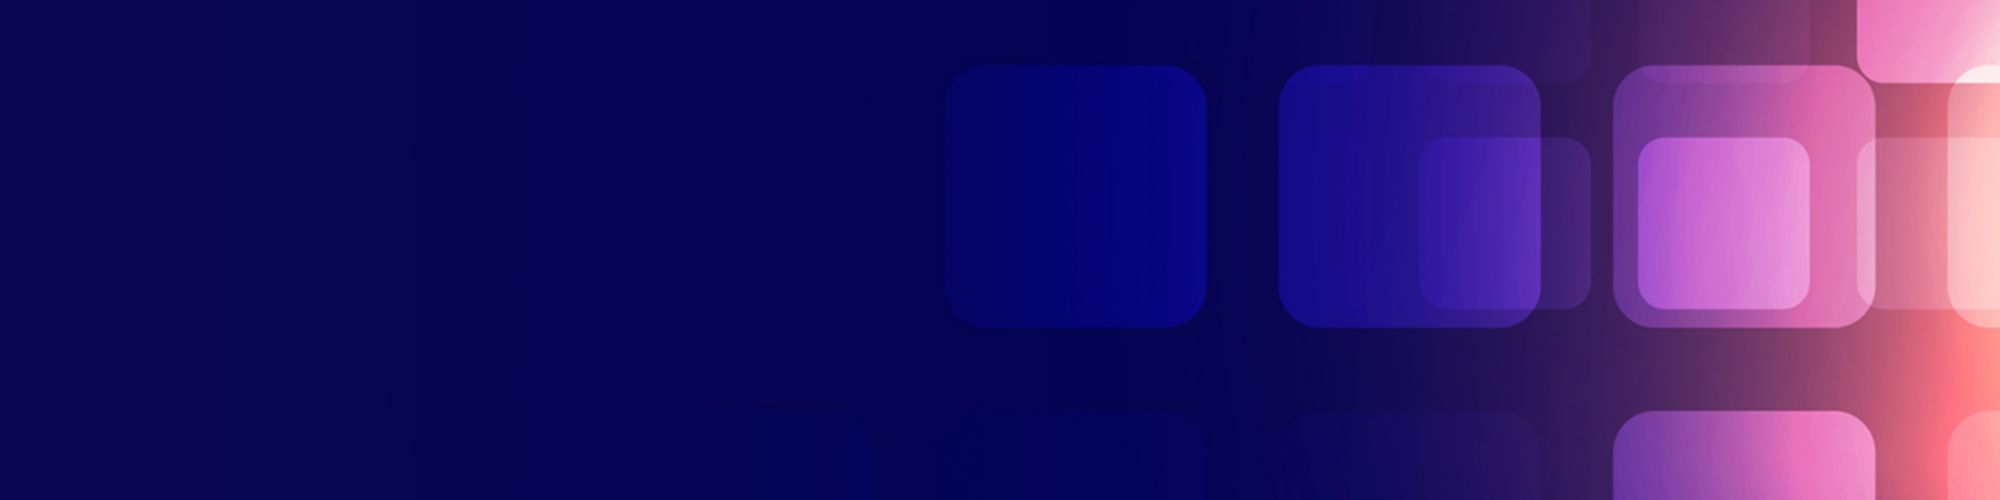 Blue and purple square design abstract